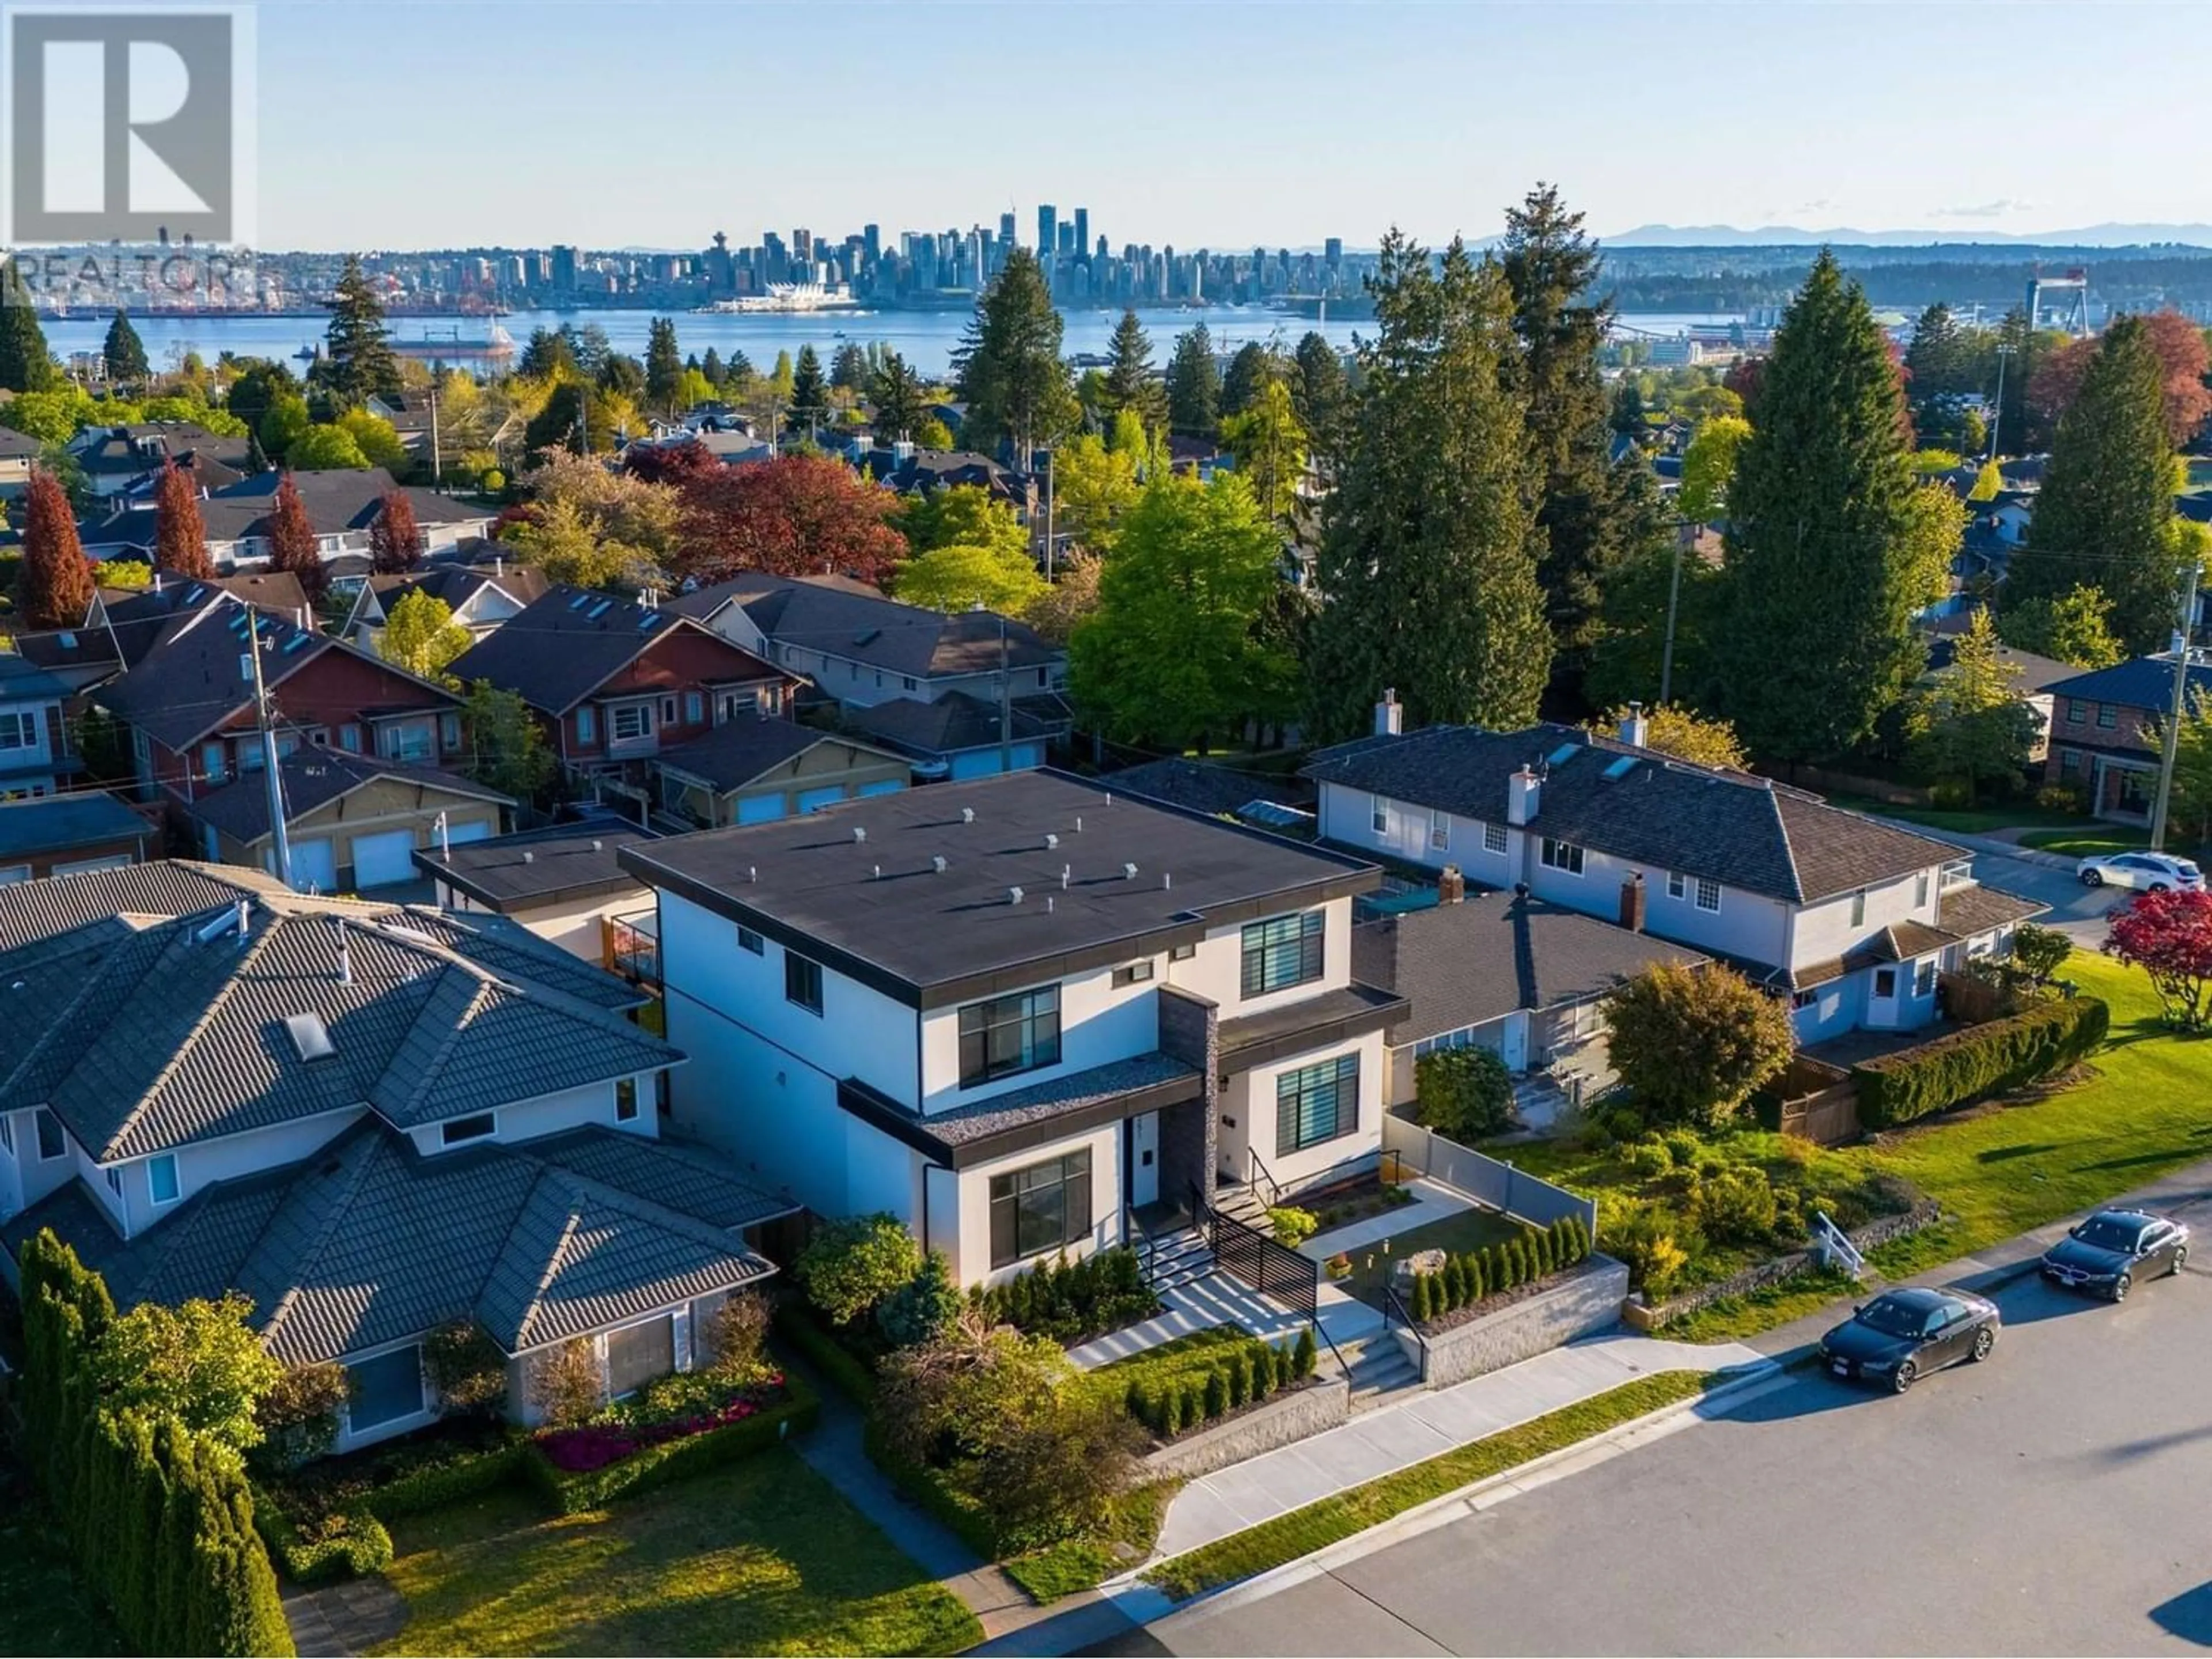 Lakeview for 251 W 18TH STREET, North Vancouver British Columbia V7M1W7